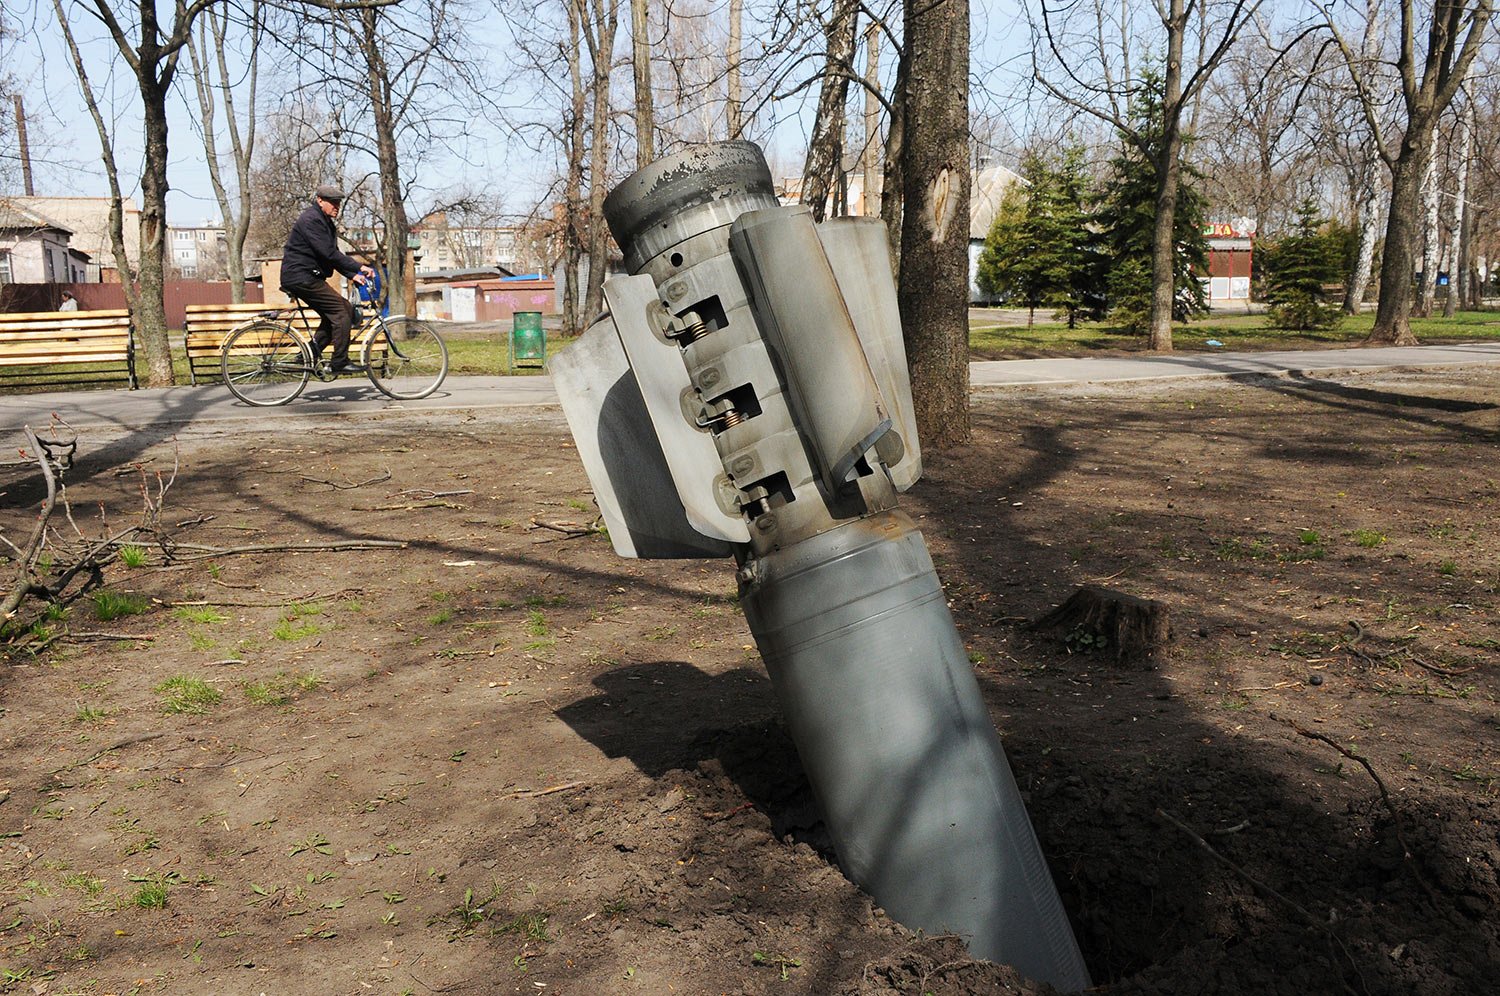  A man rides a bicycle as a tail of a missile sticks out in the city of Chuhuiv, Kharkiv region, Ukraine, Friday, April 8, 2022. (AP Photo/Andrew Marienko) 